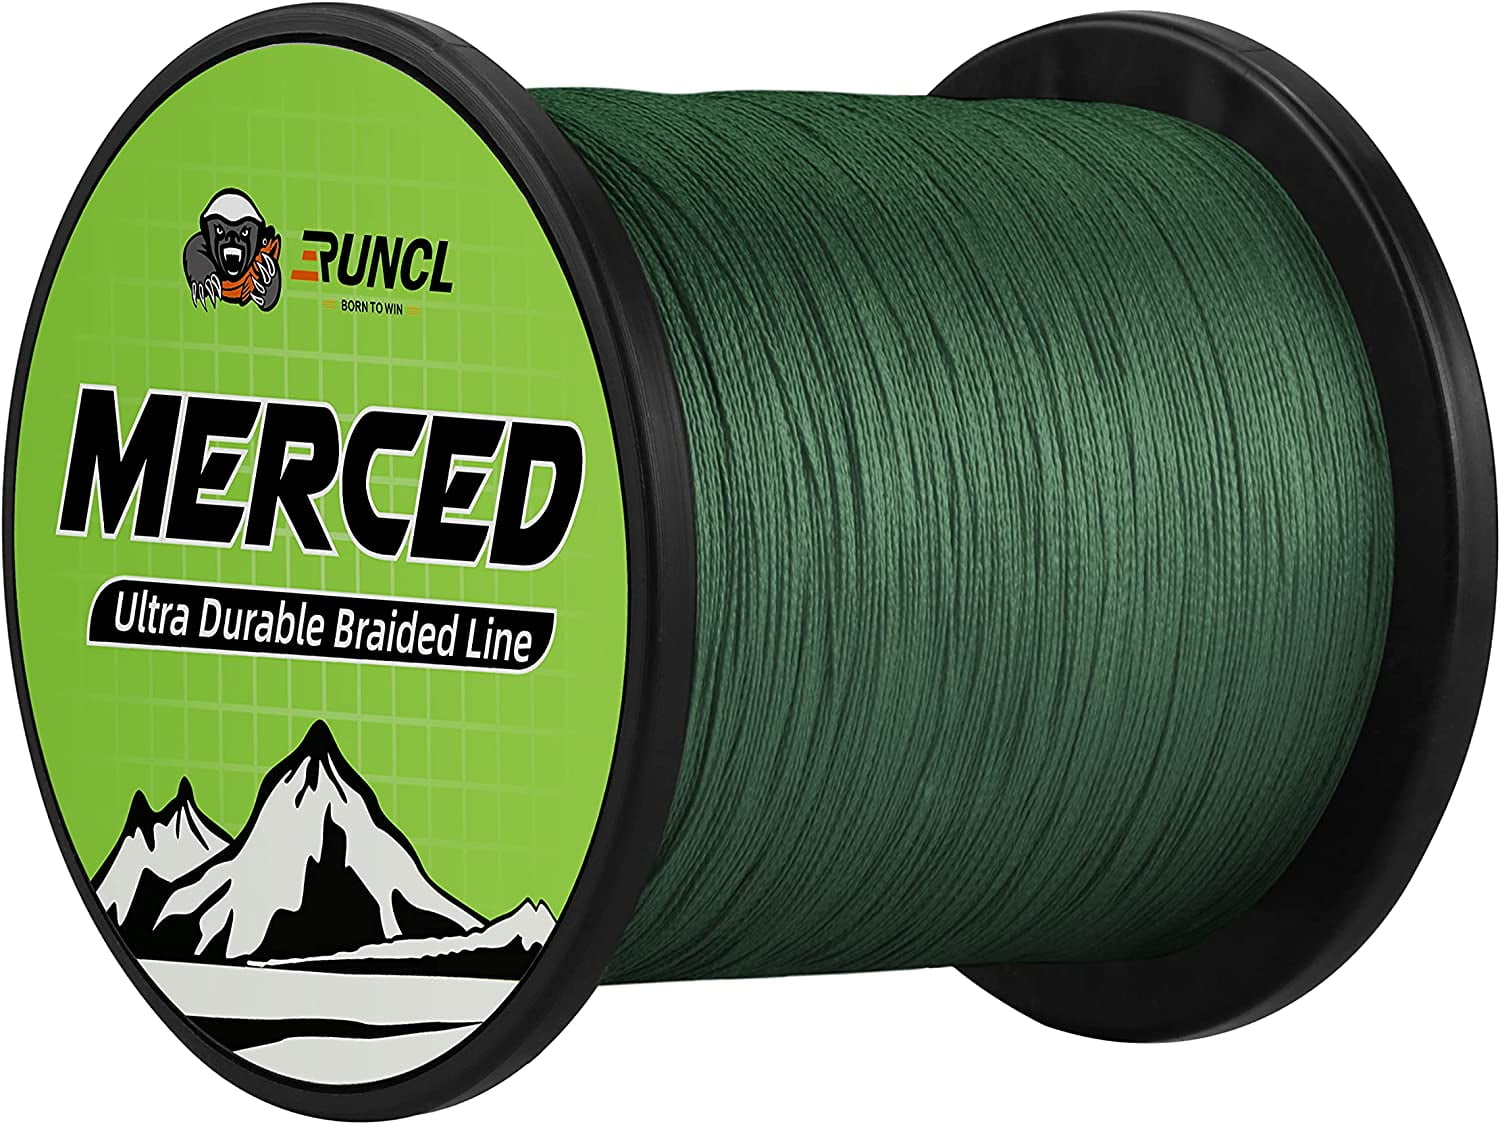 NEW CHOICE of Shakespeare Supreme Super Smooth Fishing Line 330 yds 2 6 or 10 